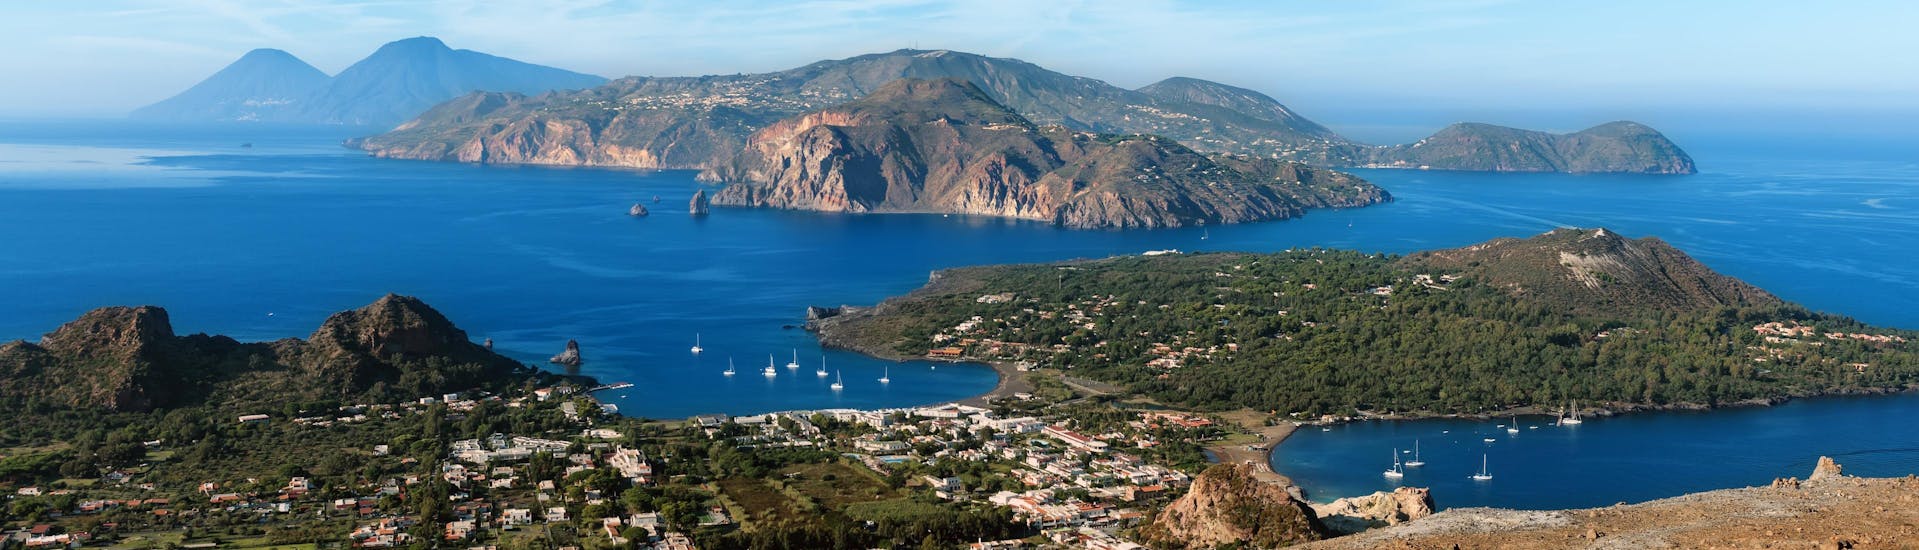 View of the Aeolian Island where boat tour providers offer their trips during summer.